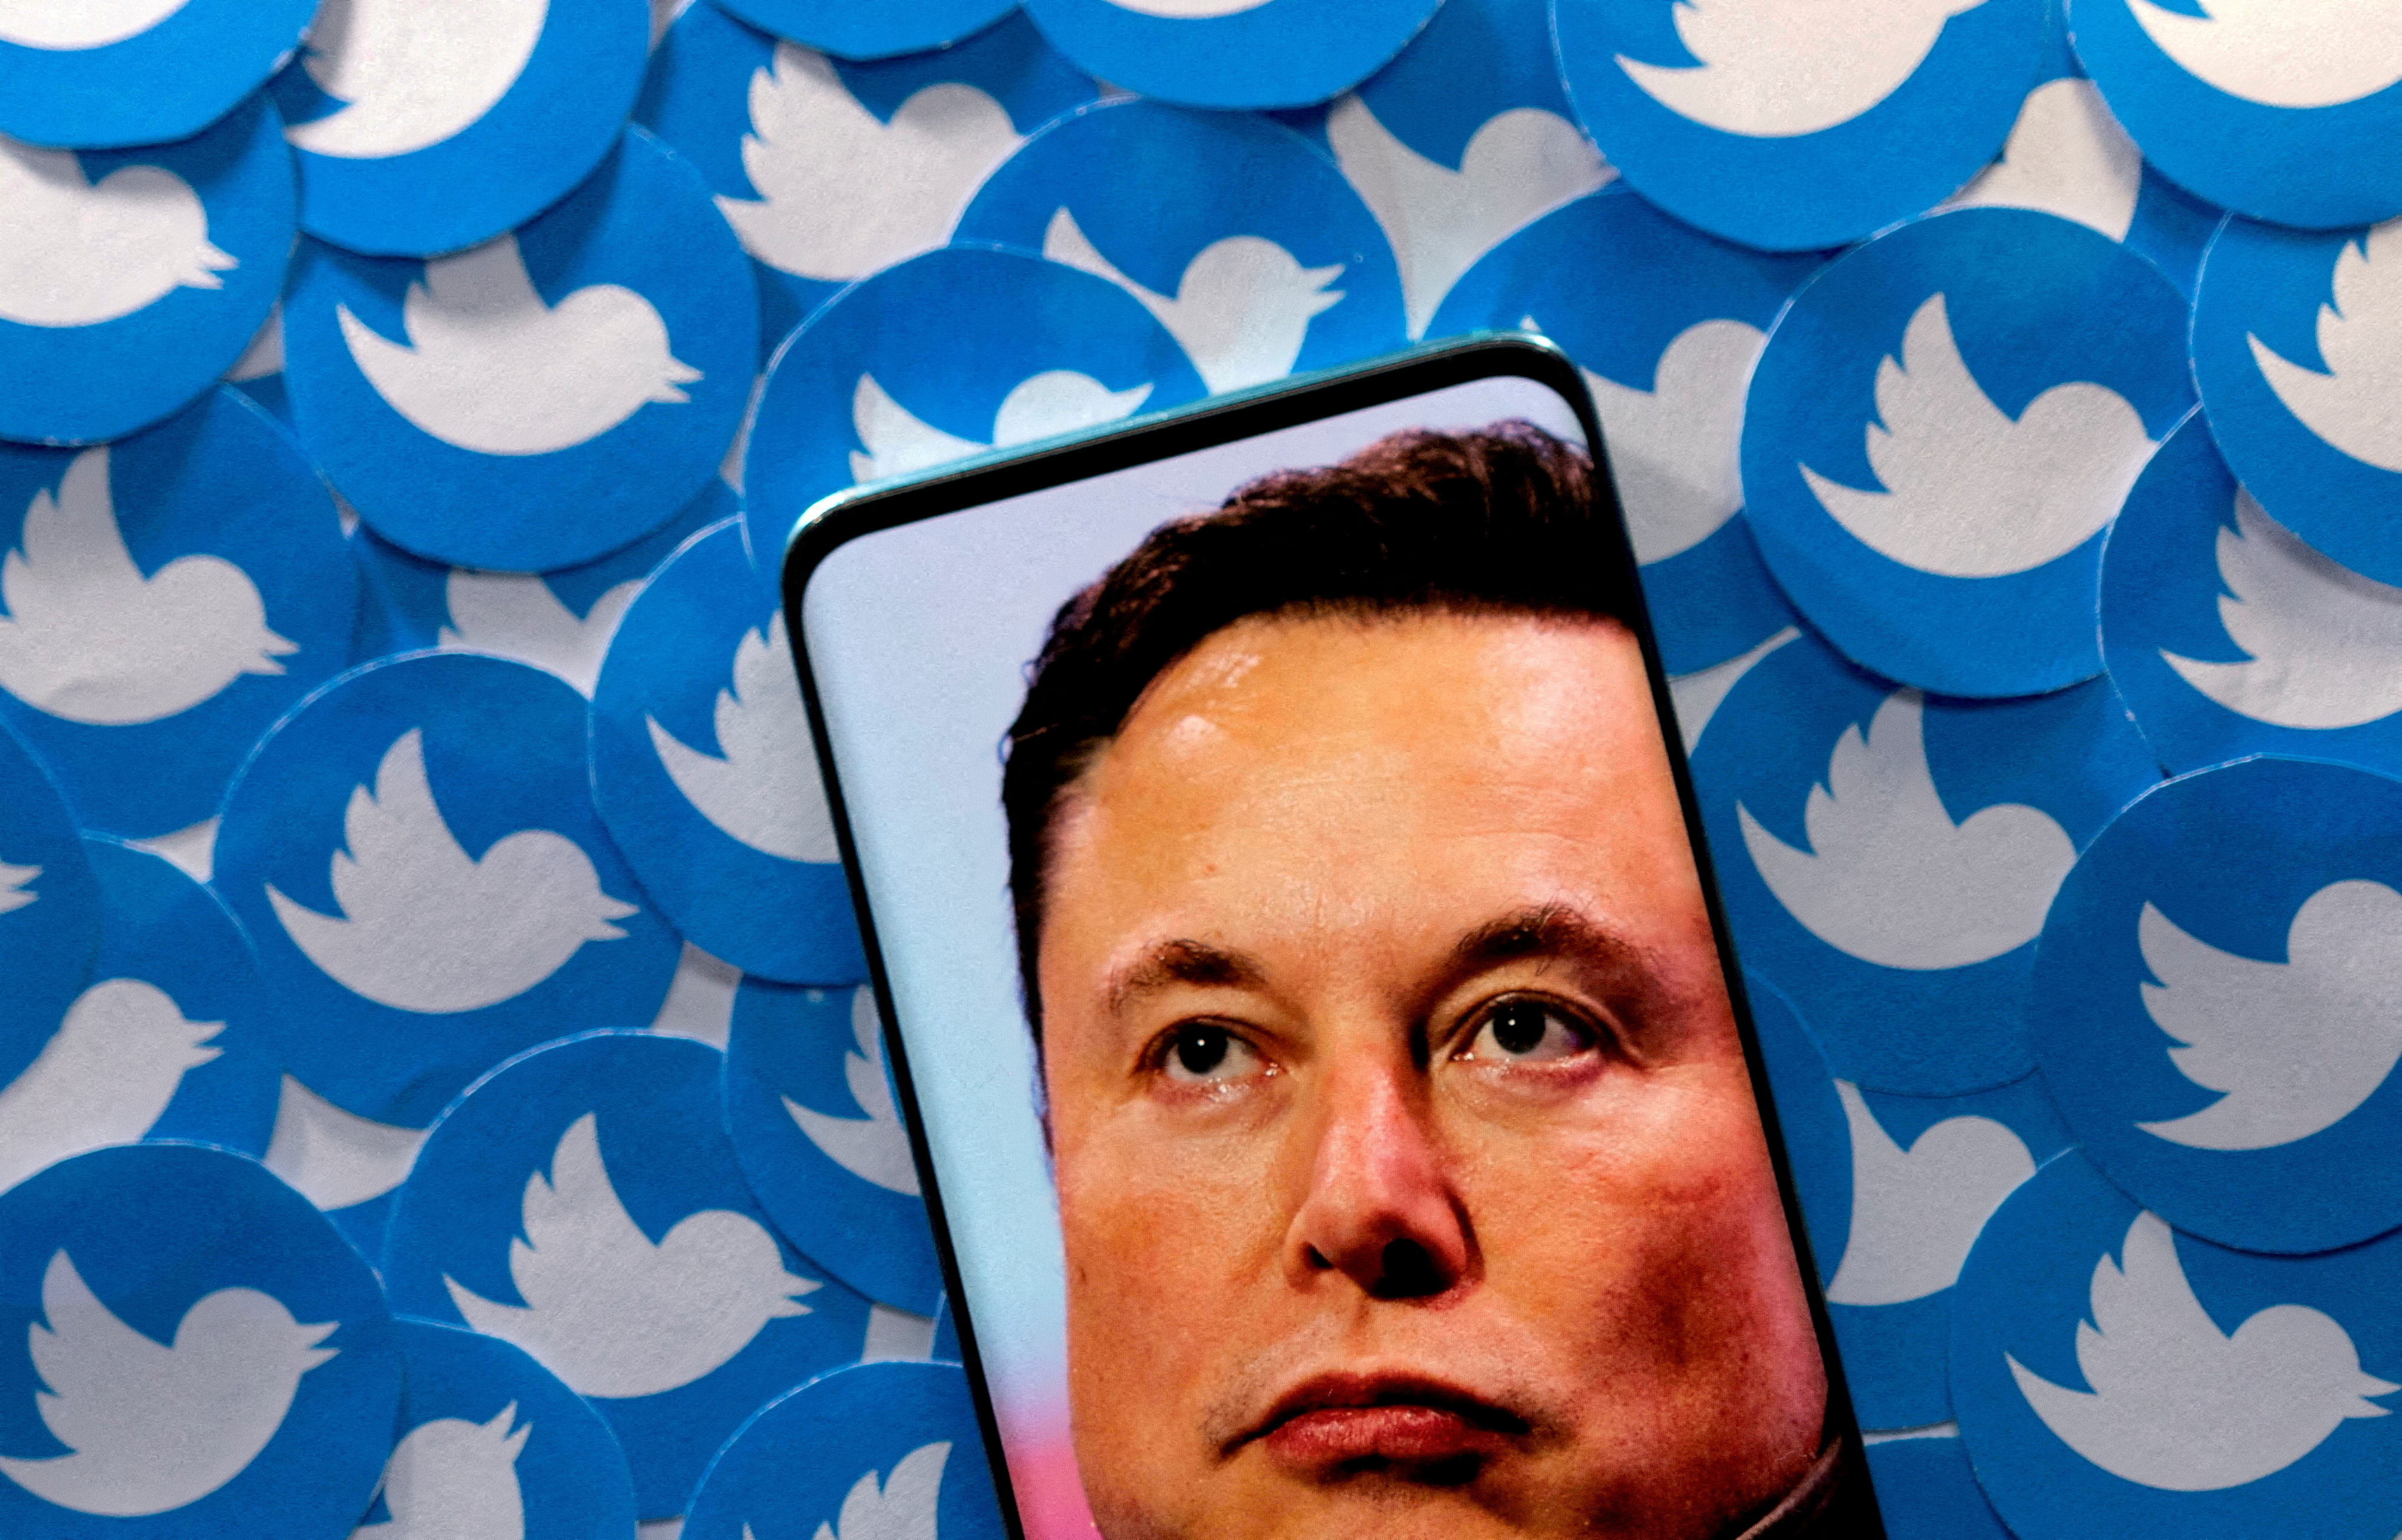 The illustration shows a picture of Elon Musk on a smartphone with the Twitter logo printed on it